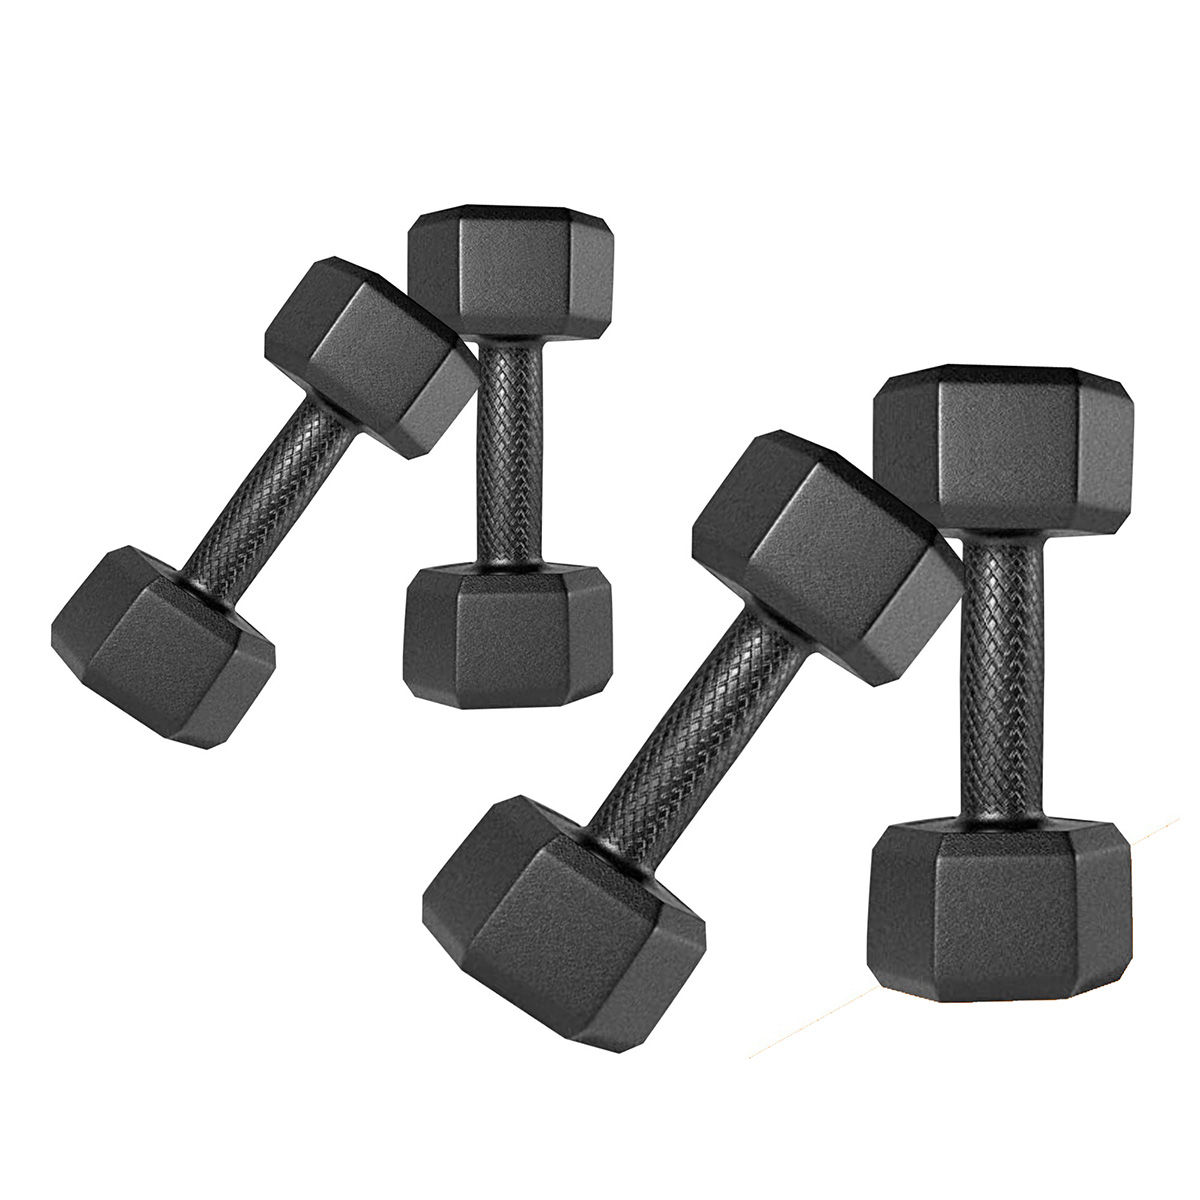 Fitzon PVC Hexa DM-3KG and 5KG Combo 161 Dumbbells and Fitness Kit Whole Body Workout (Set of 2)